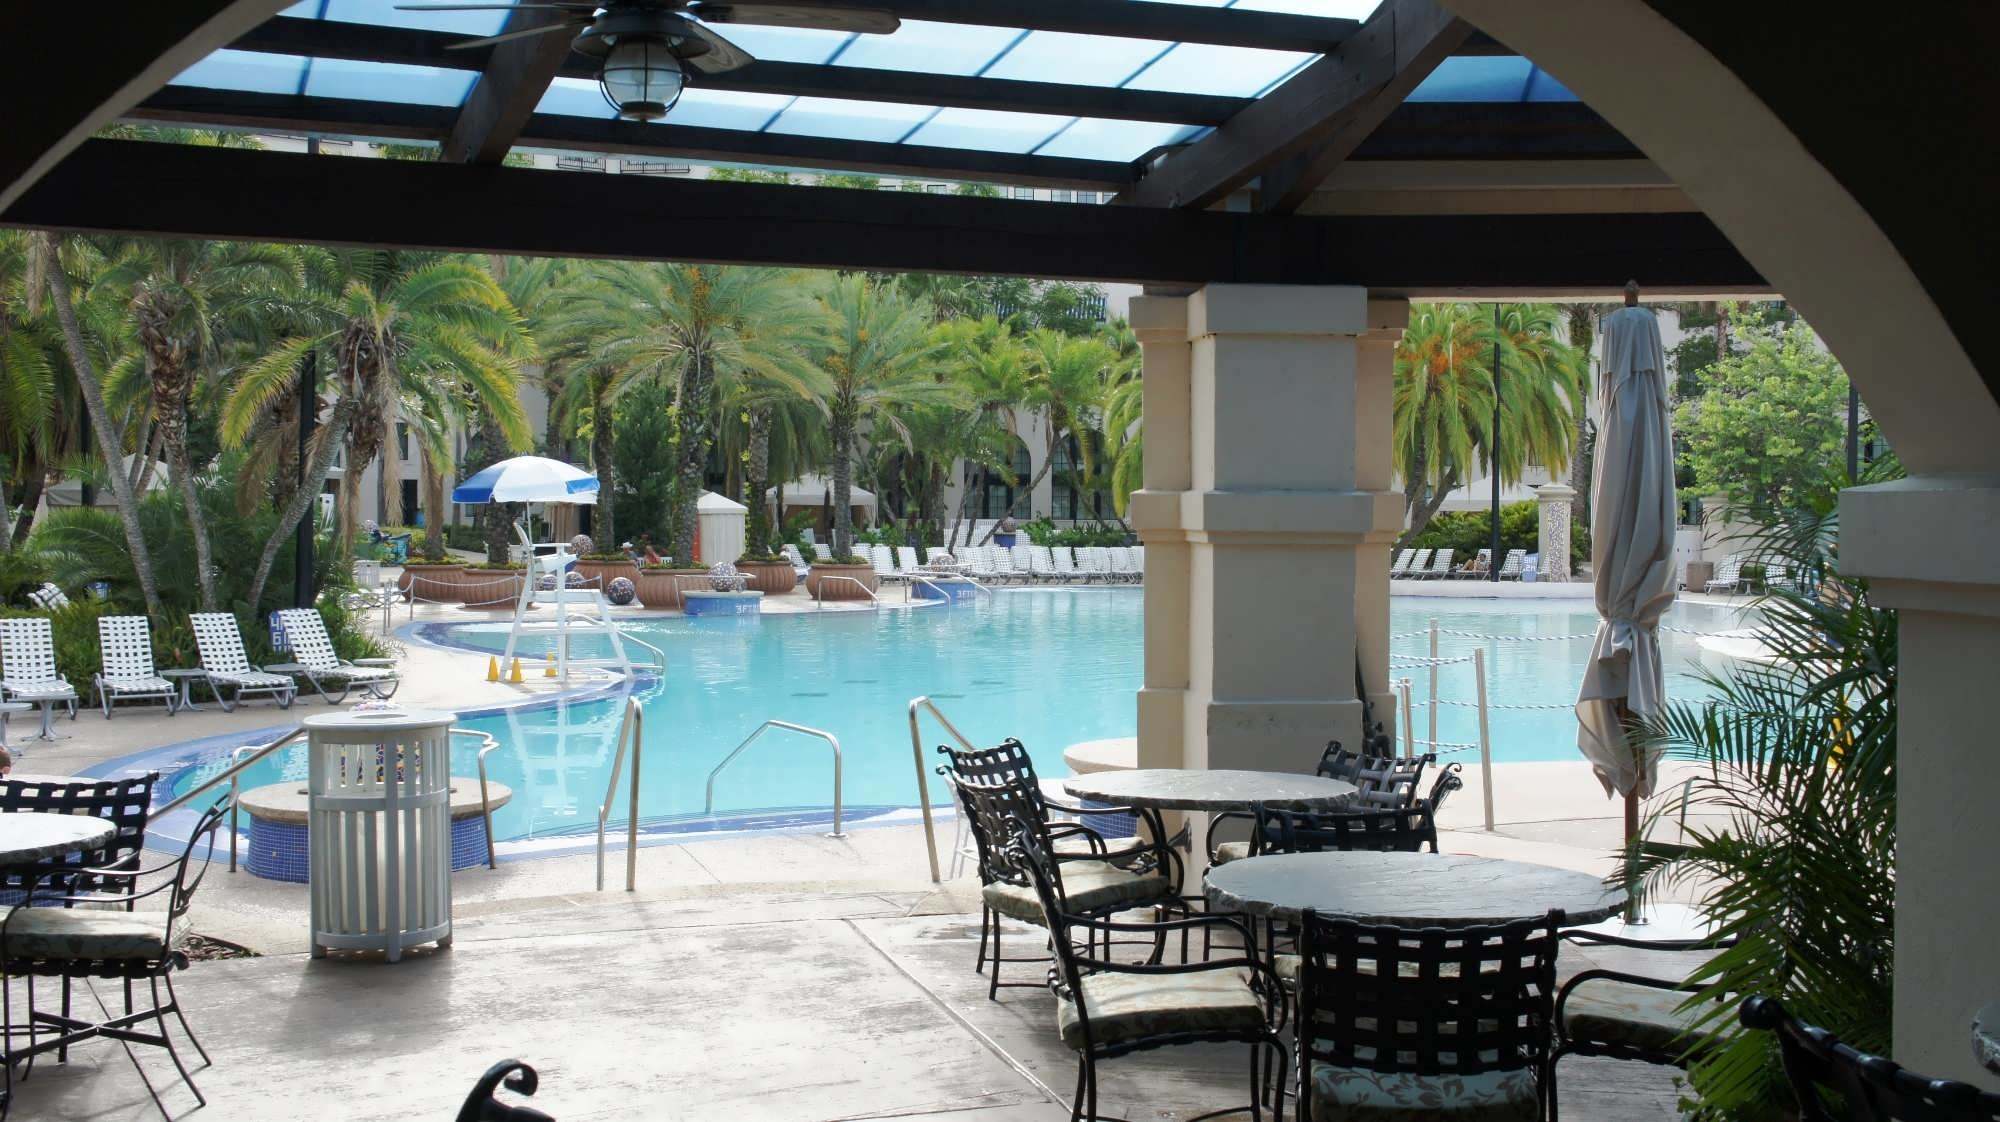 View of the pool from inside the Beachclub bar area at Hard Rock Hotel